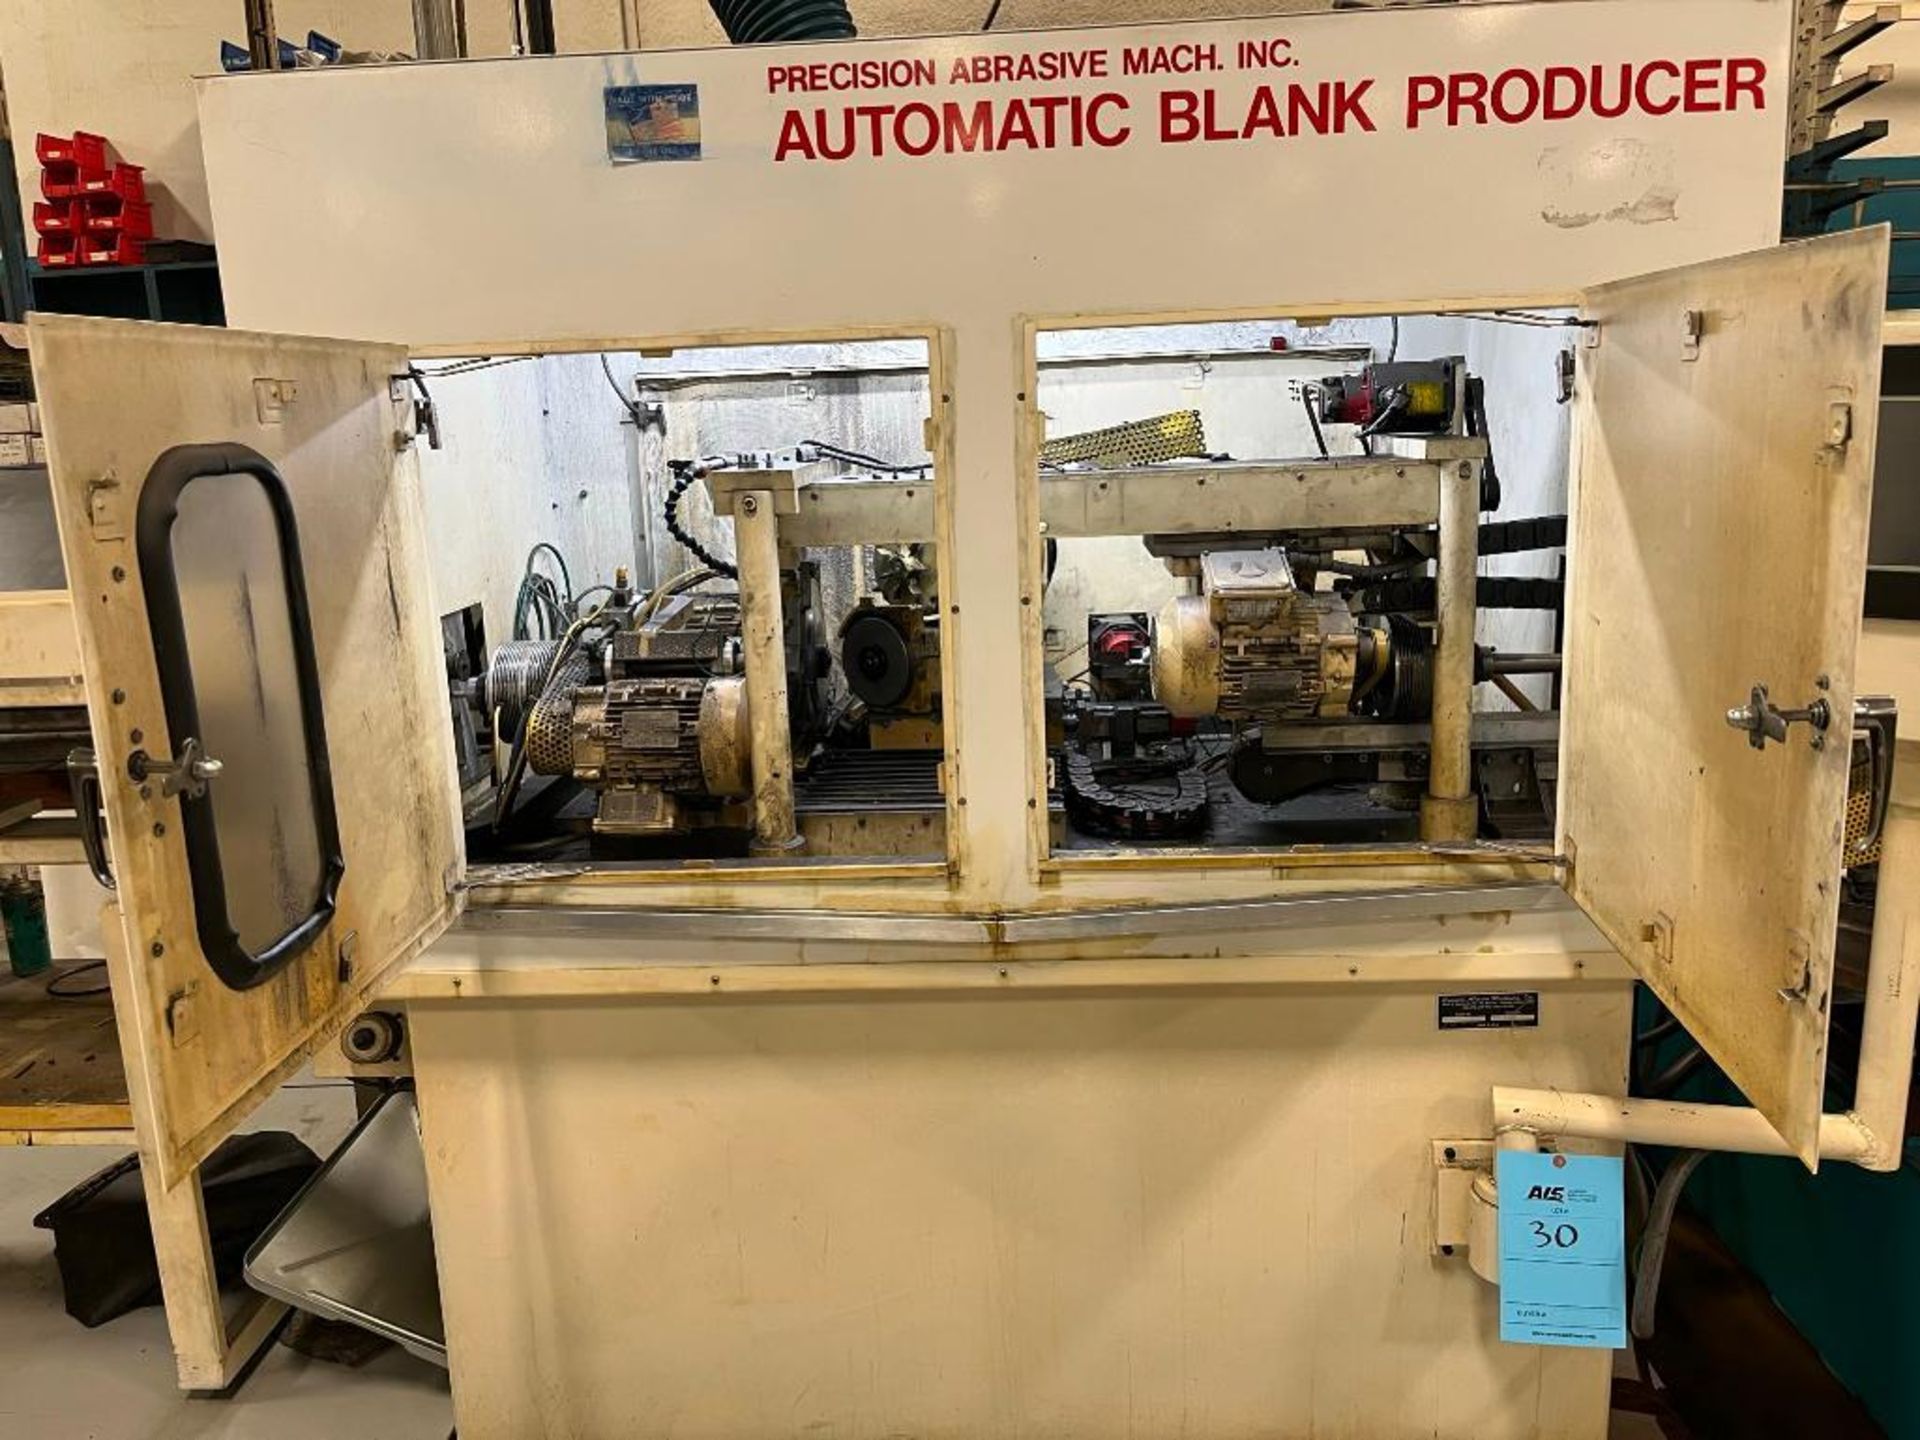 Precision Abrasive Machine Automatic Blank Producer, S/N 905161001, with Bar Feeders - Image 3 of 4